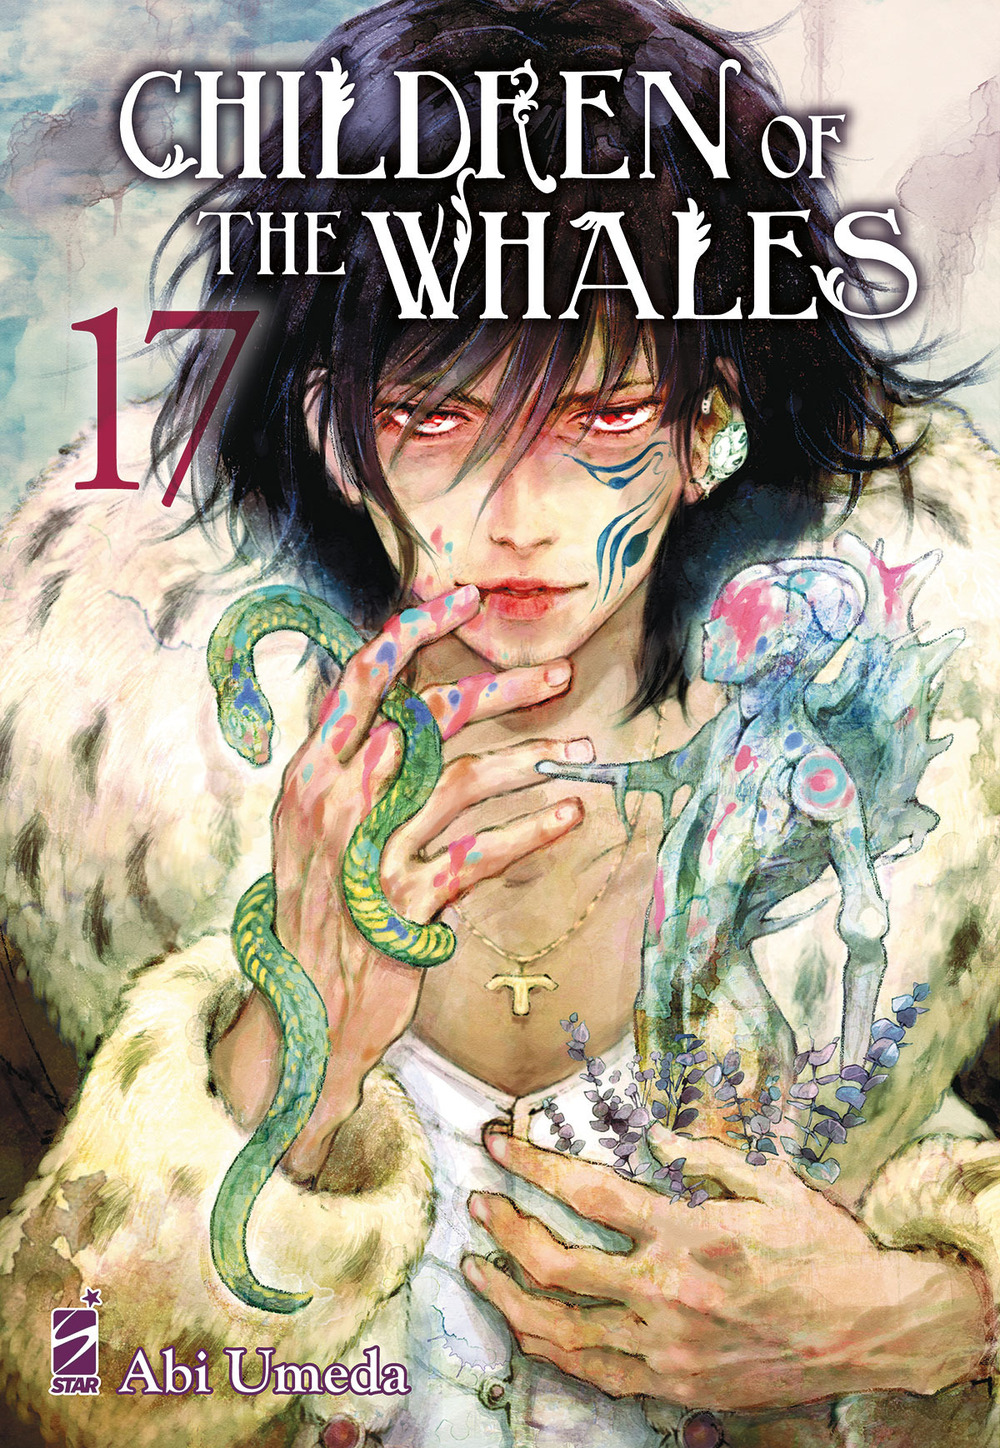 Children of the whales. Vol. 17